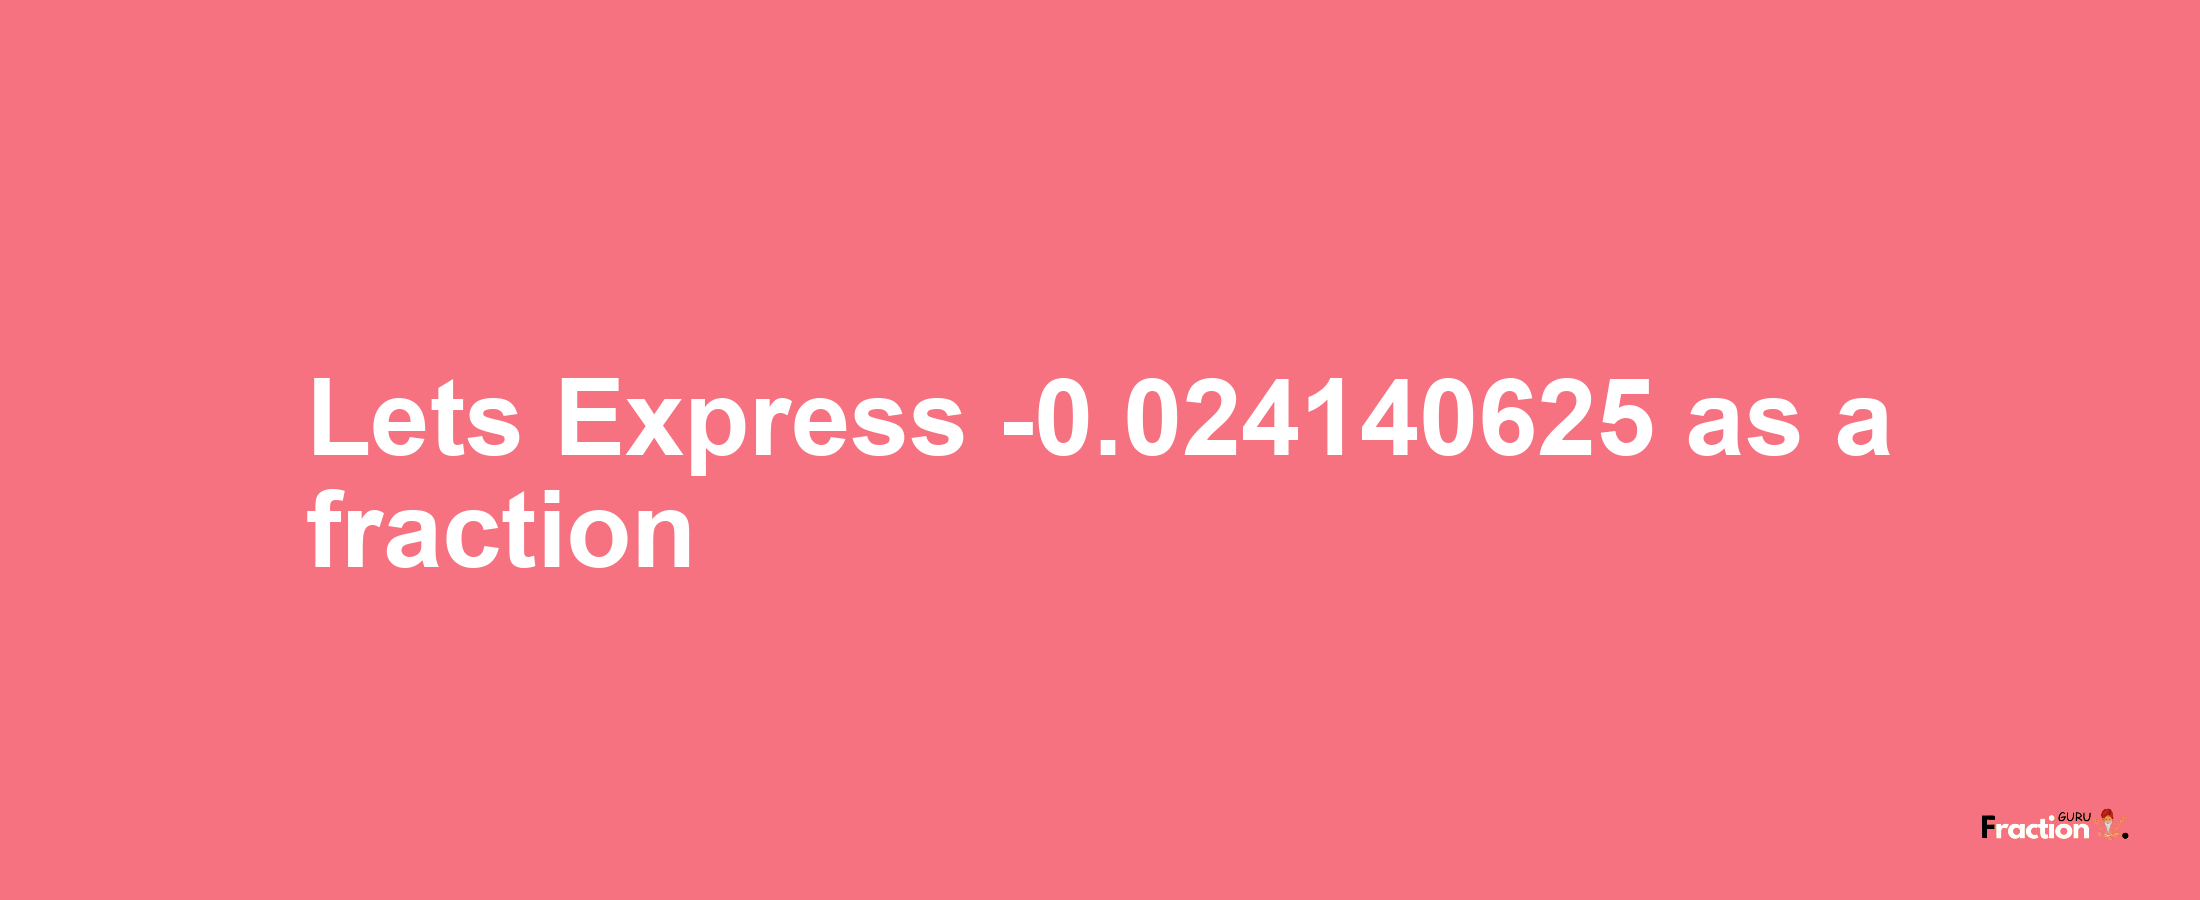 Lets Express -0.024140625 as afraction